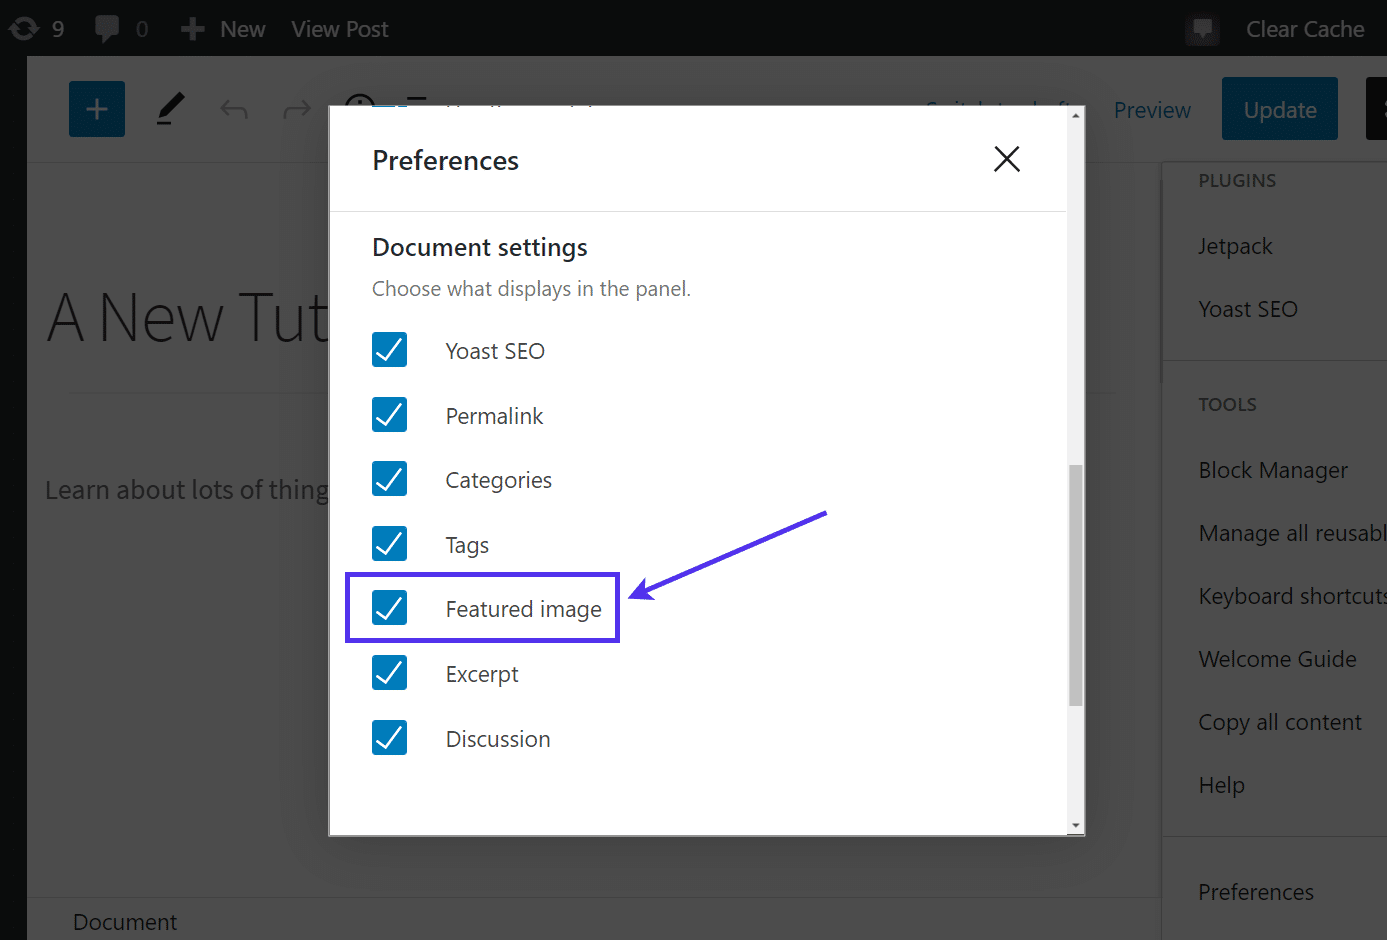 Tick the "Featured Image" checkbox under Preferences